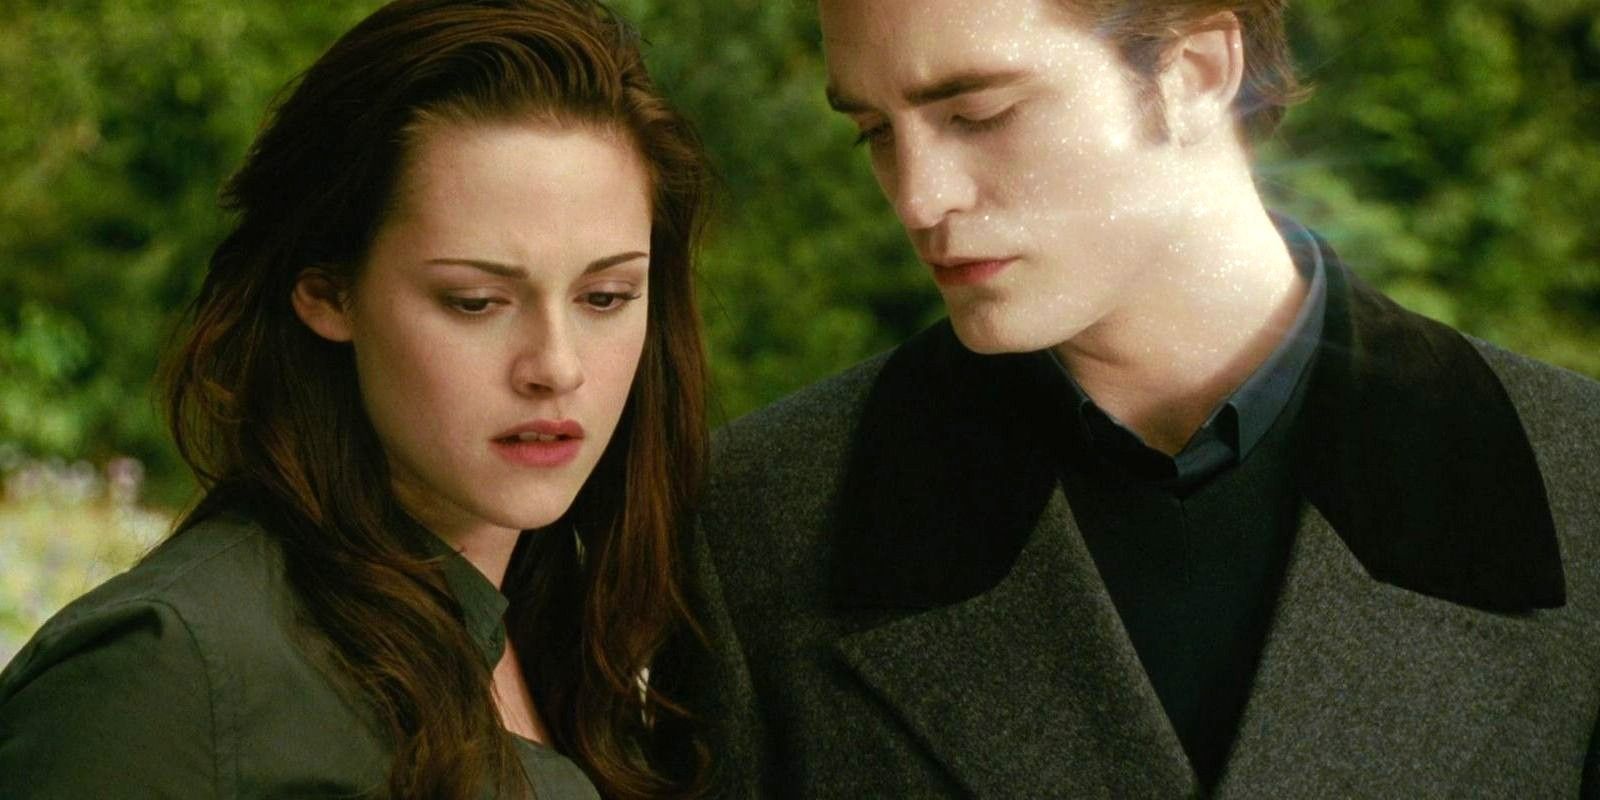 Twilight Fans Are Freaking Out Over Seeing The Movie Without Its